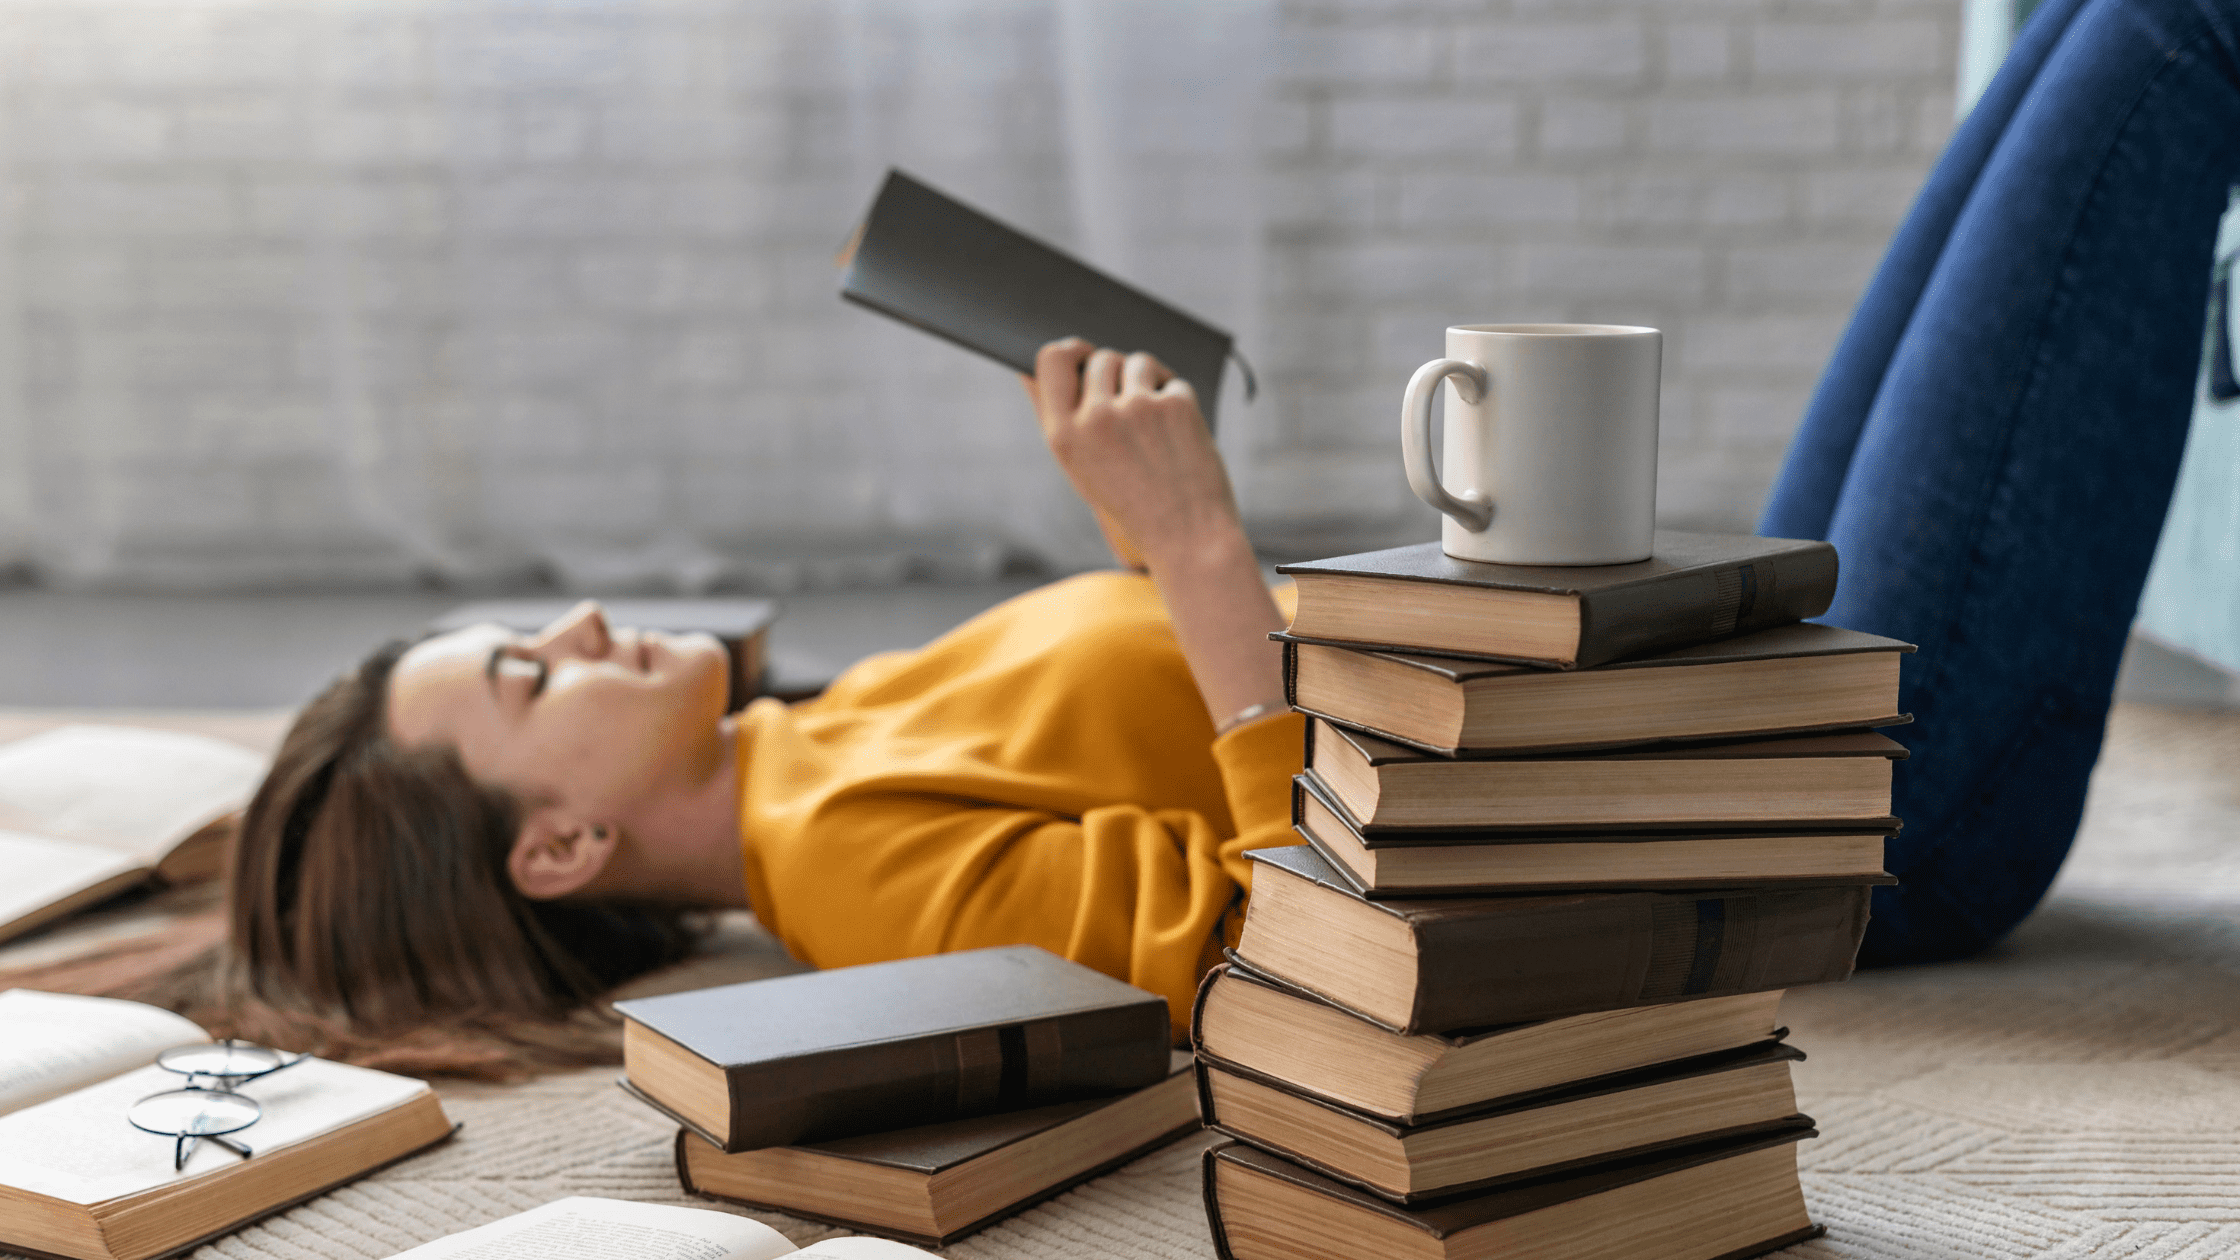 How to Read More Books - 30 Practical Tips